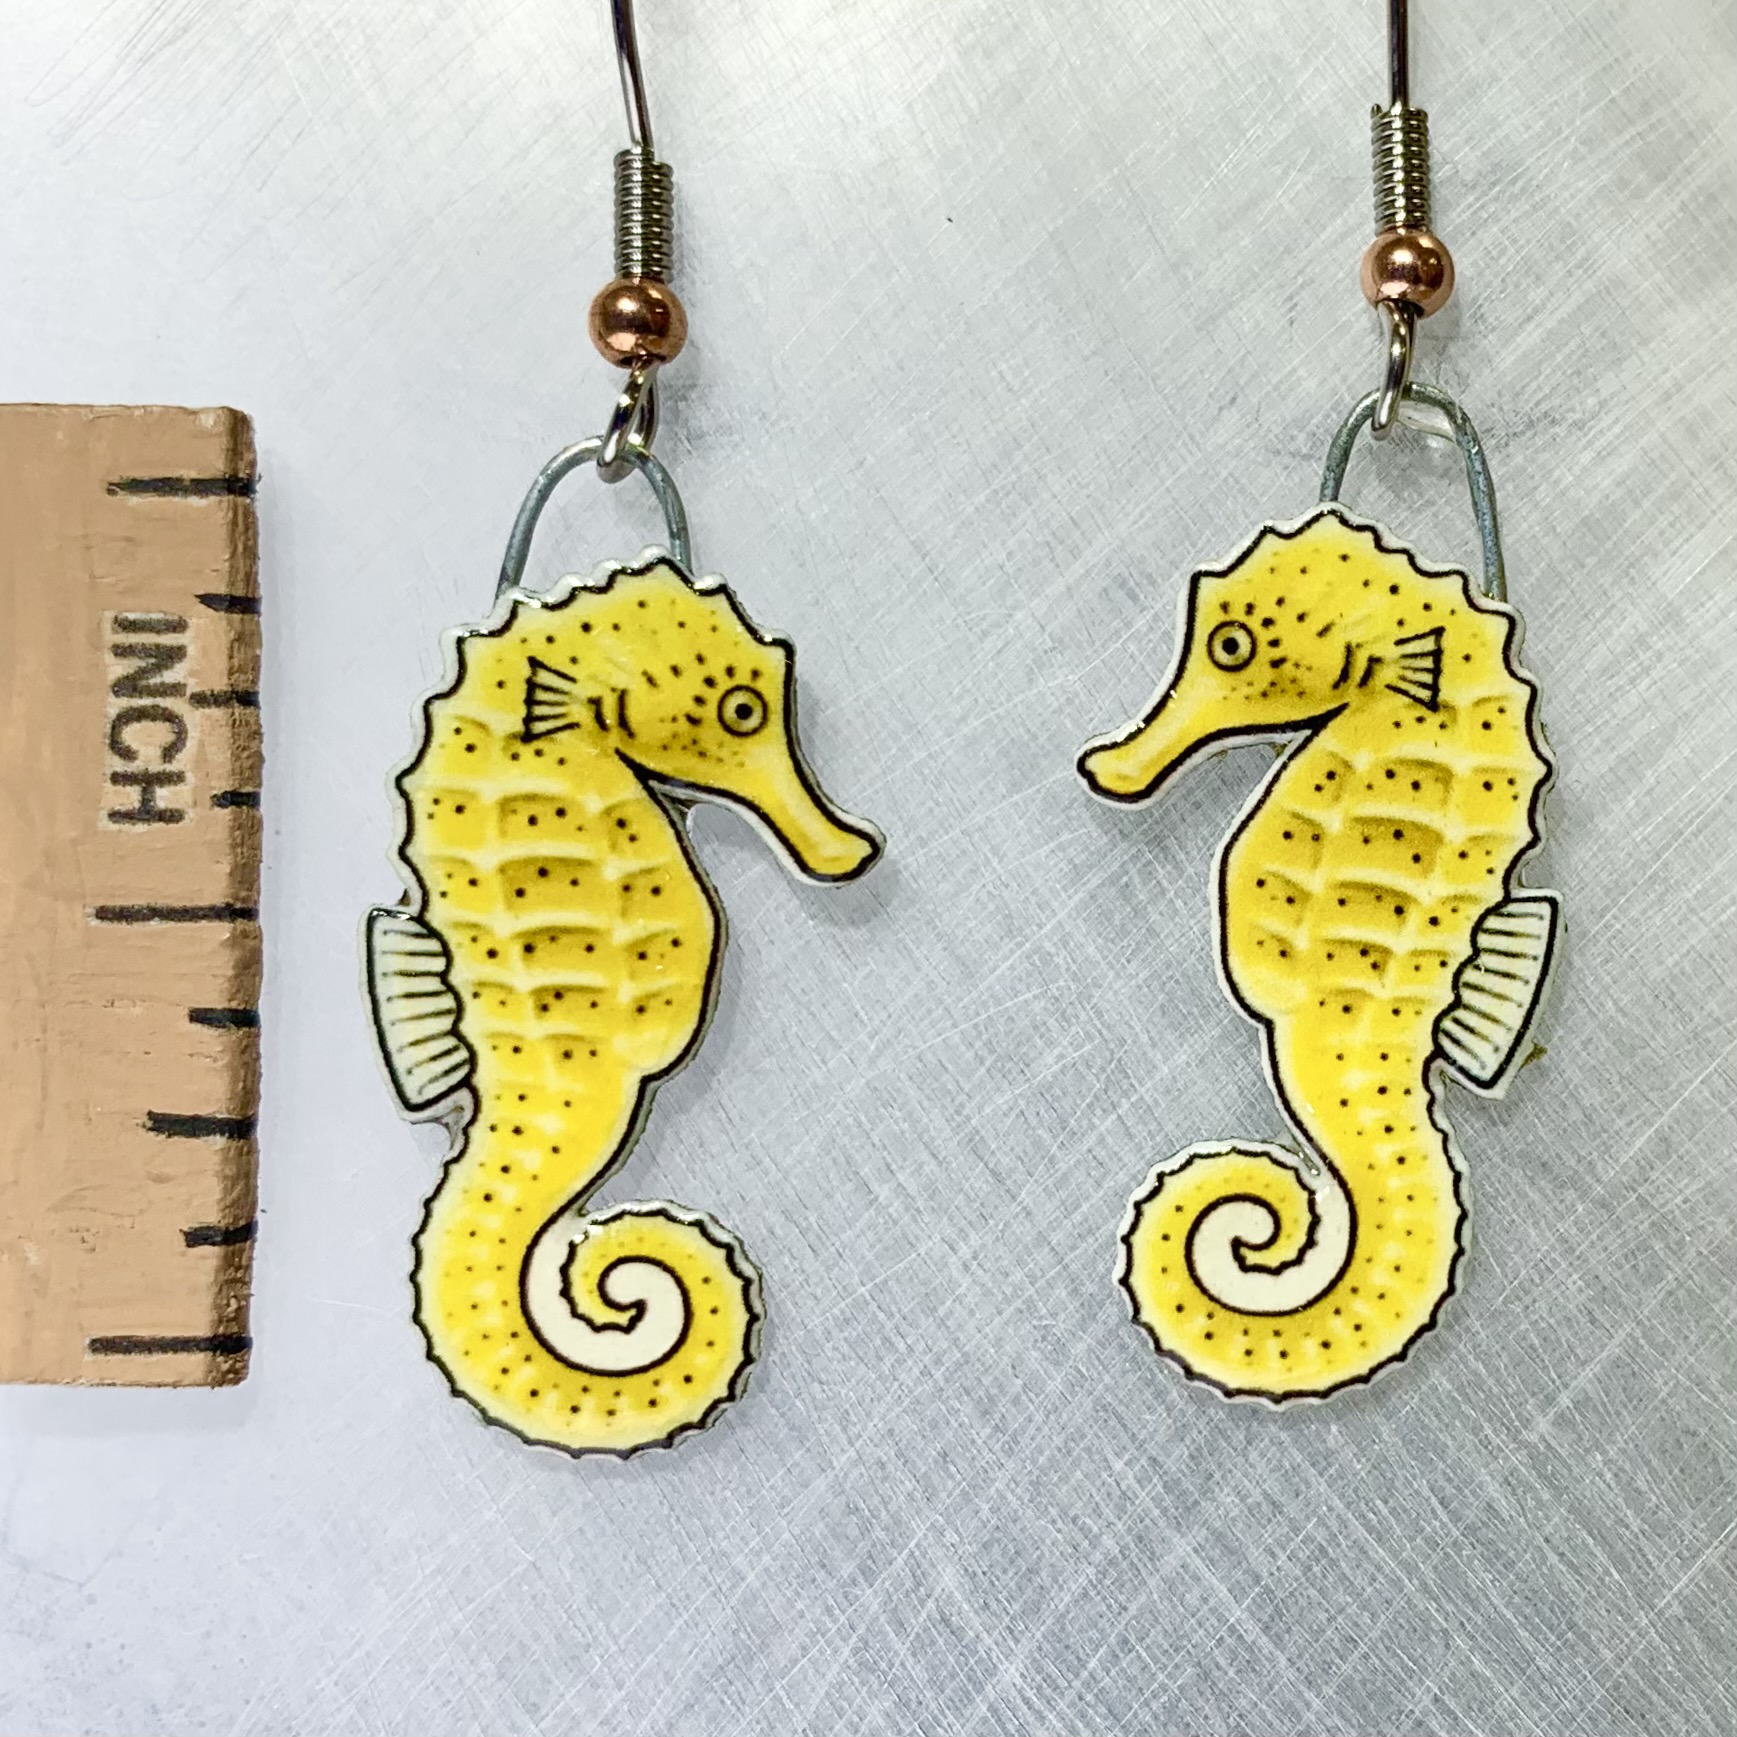 Picture shown is of 1 inch tall pair of earrings of the marine animal the Yellow Seahorse.